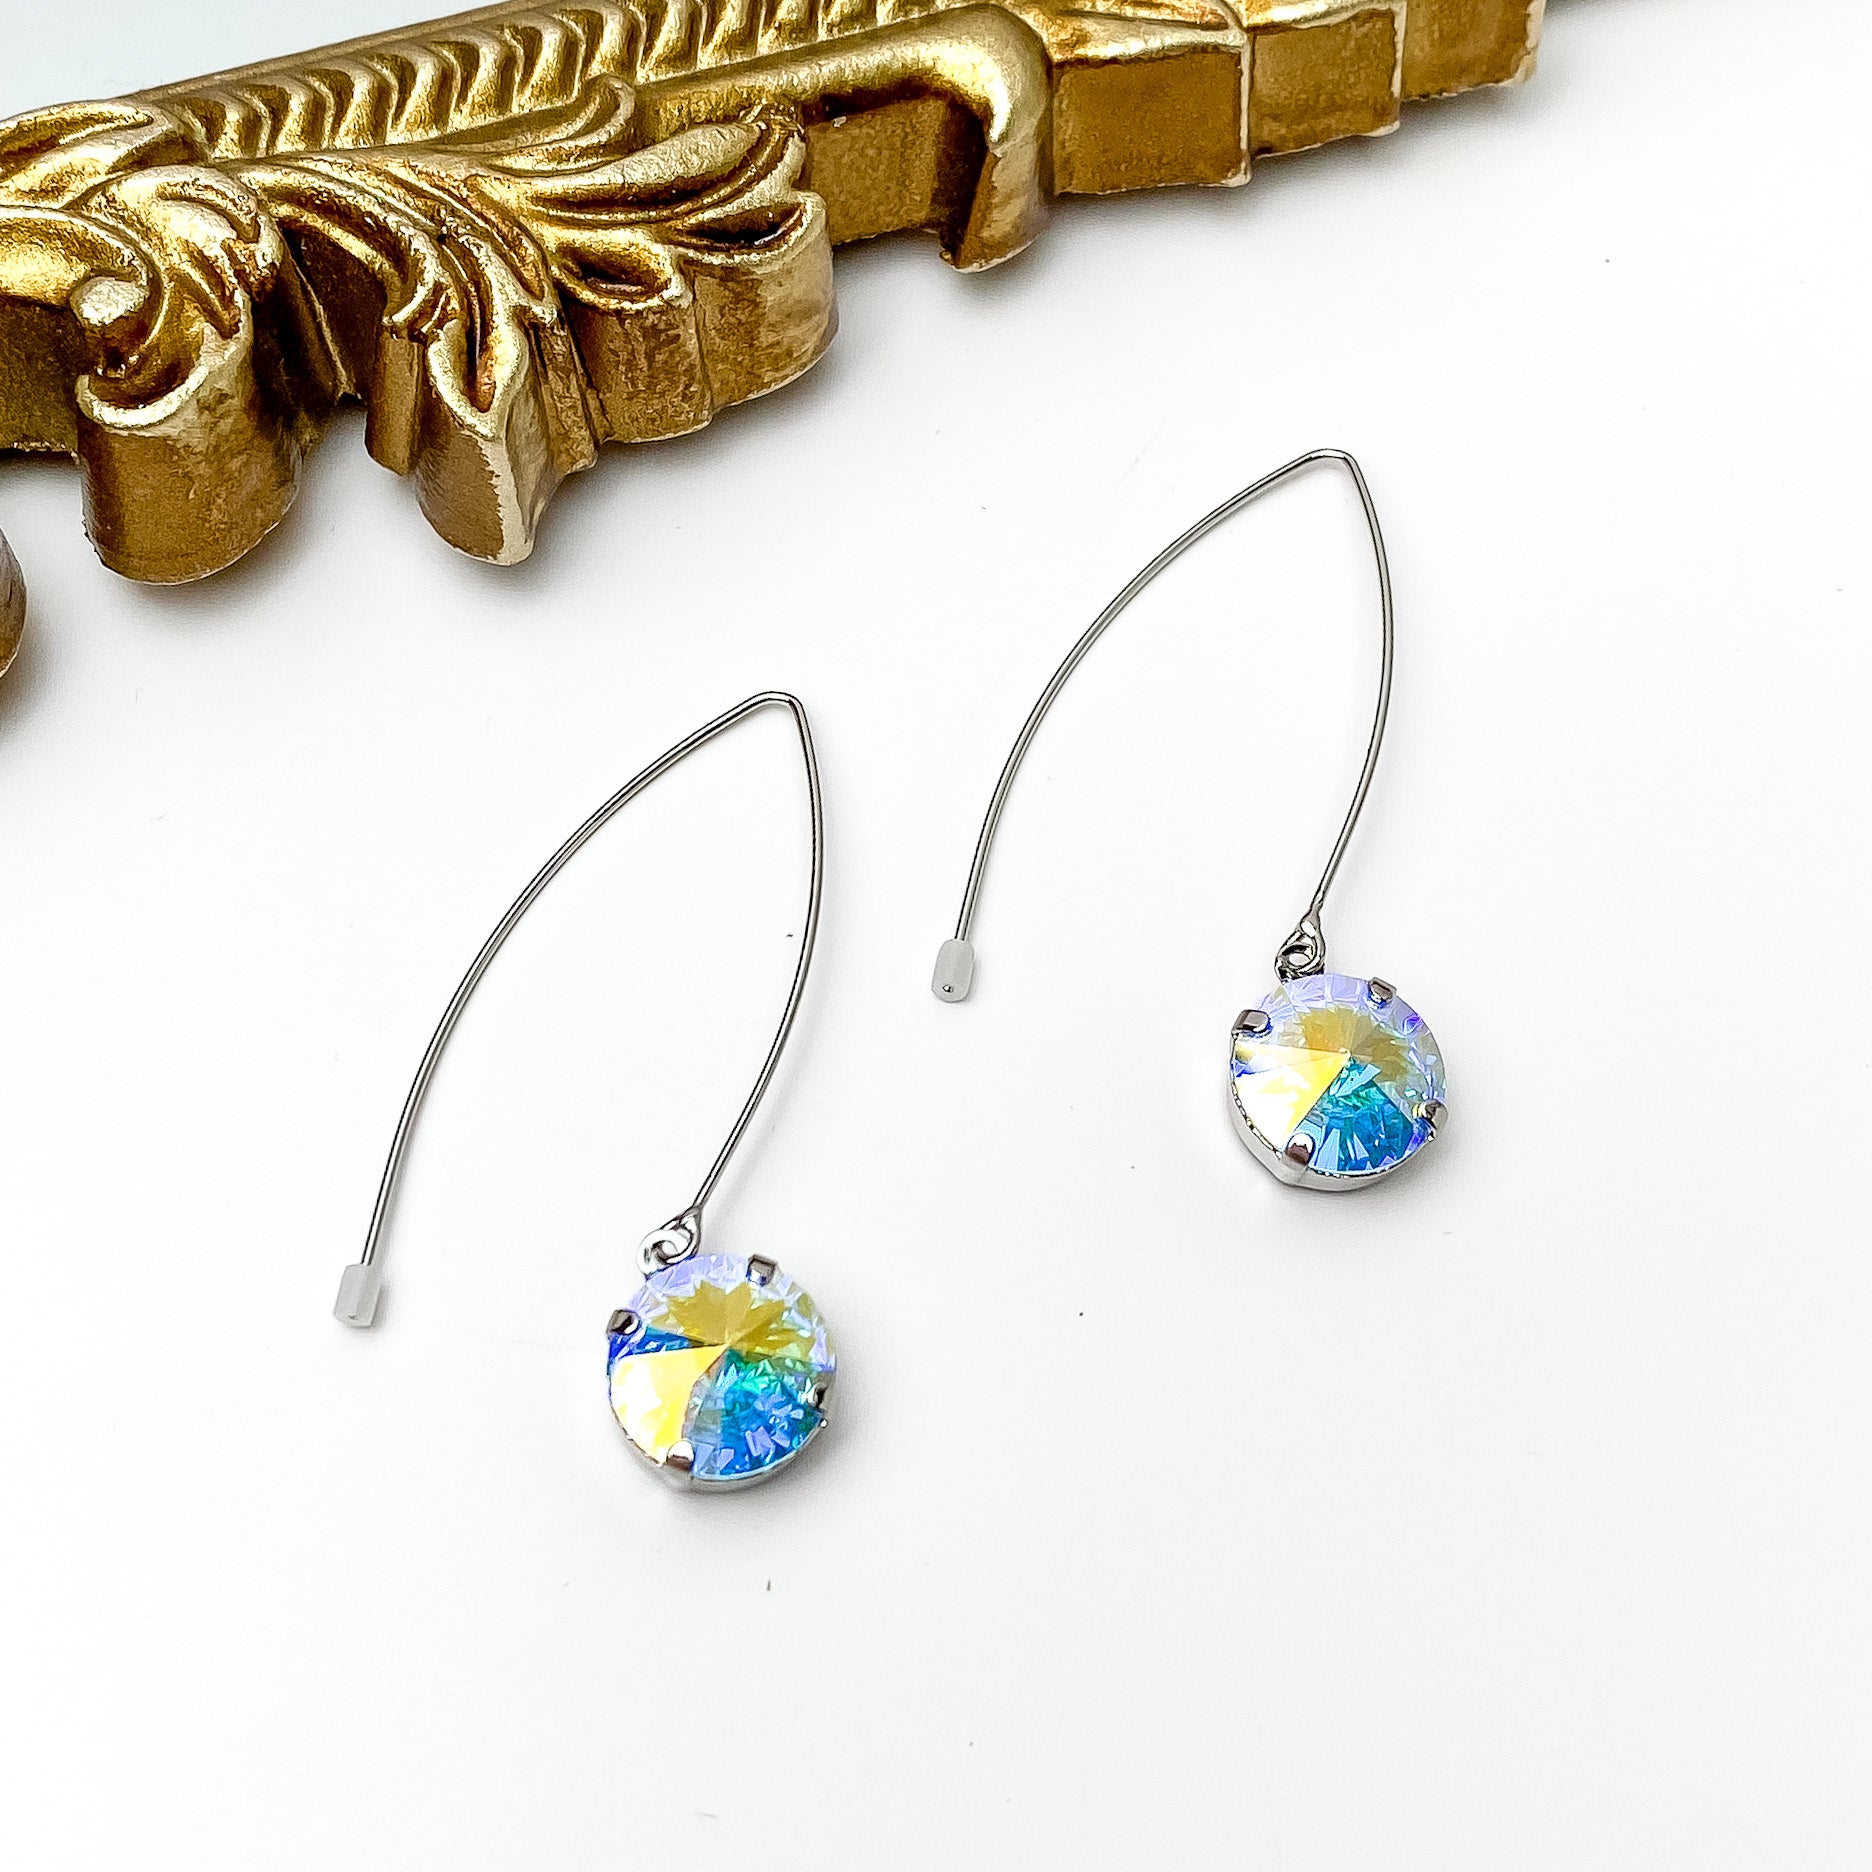 Silver, kidney wire dangle earrings. These earrings include a round ab crystal drop. These earrings are pictured in front of a gold mirror on a white background. 